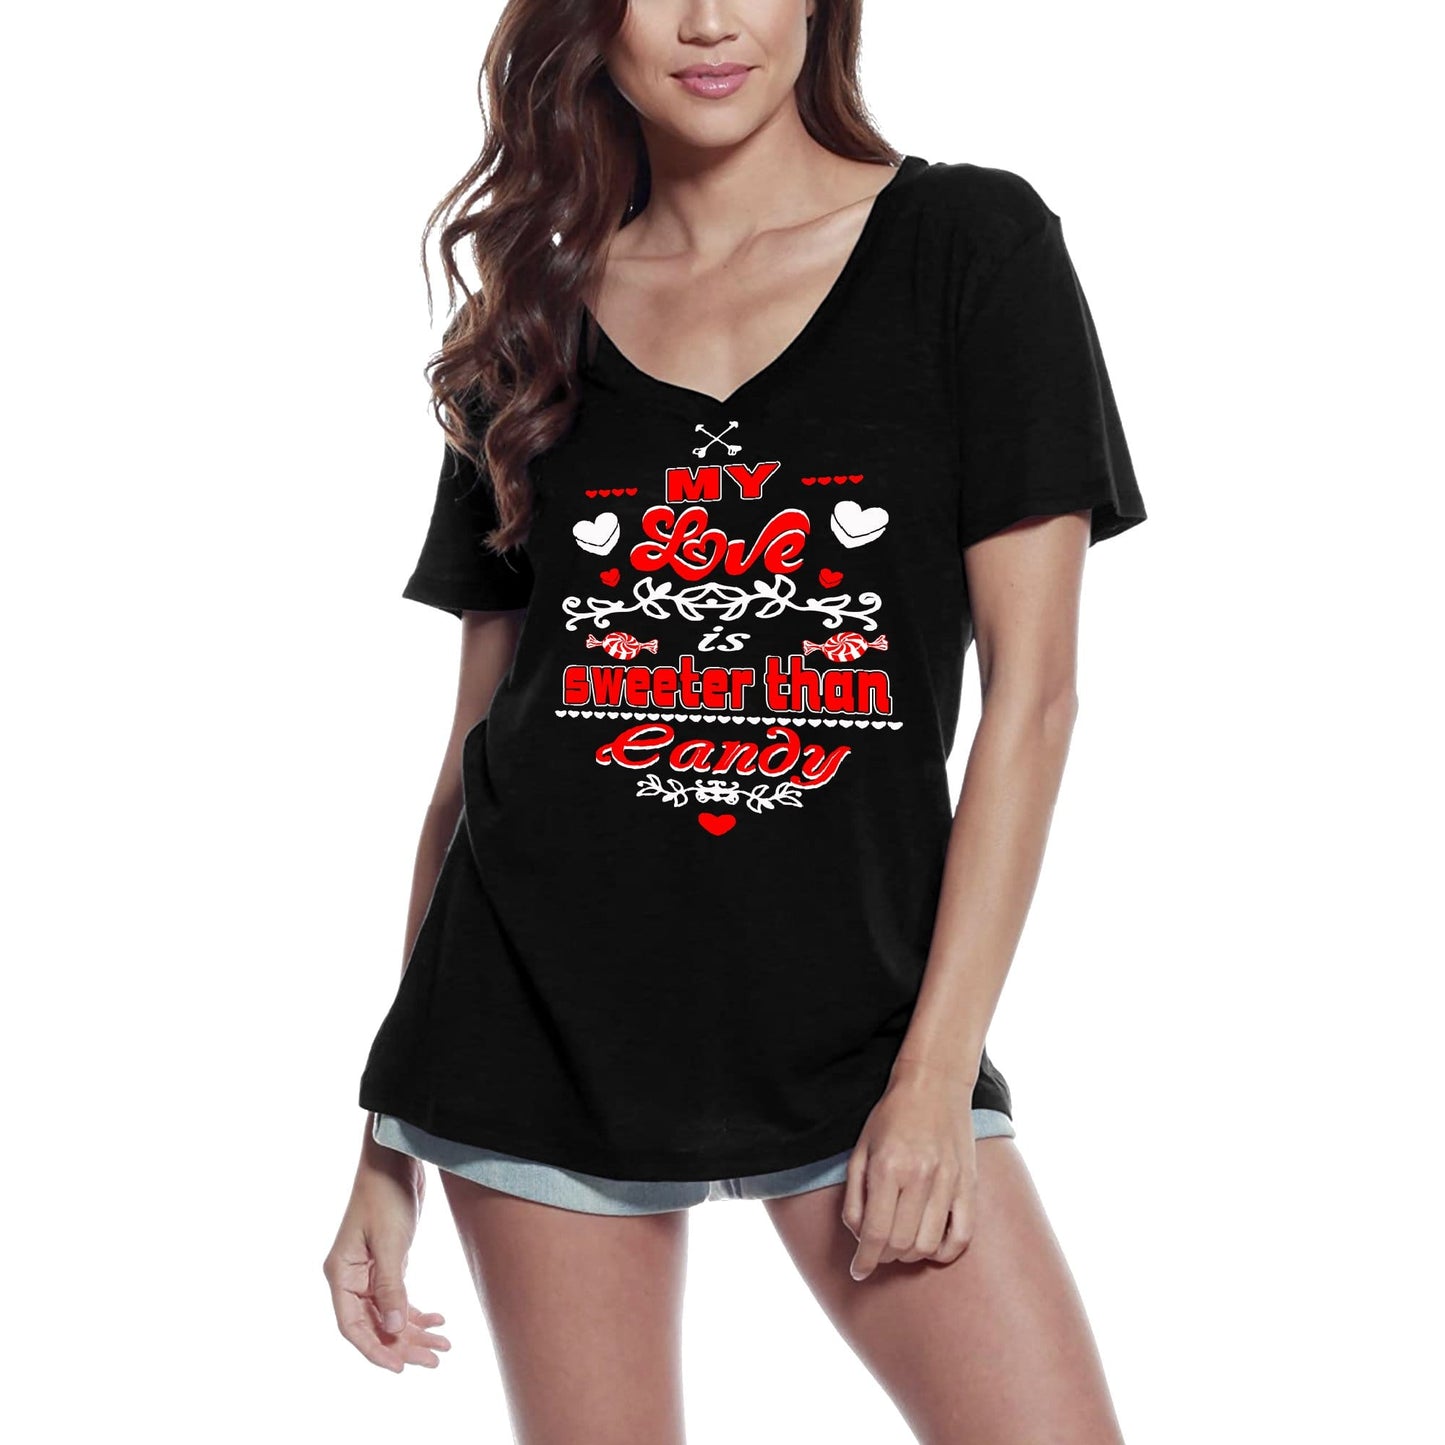 ULTRABASIC Women's T-Shirt My Love Is Sweeter Than Candy - Valentine's Day Short Sleeve Graphic Tees Tops